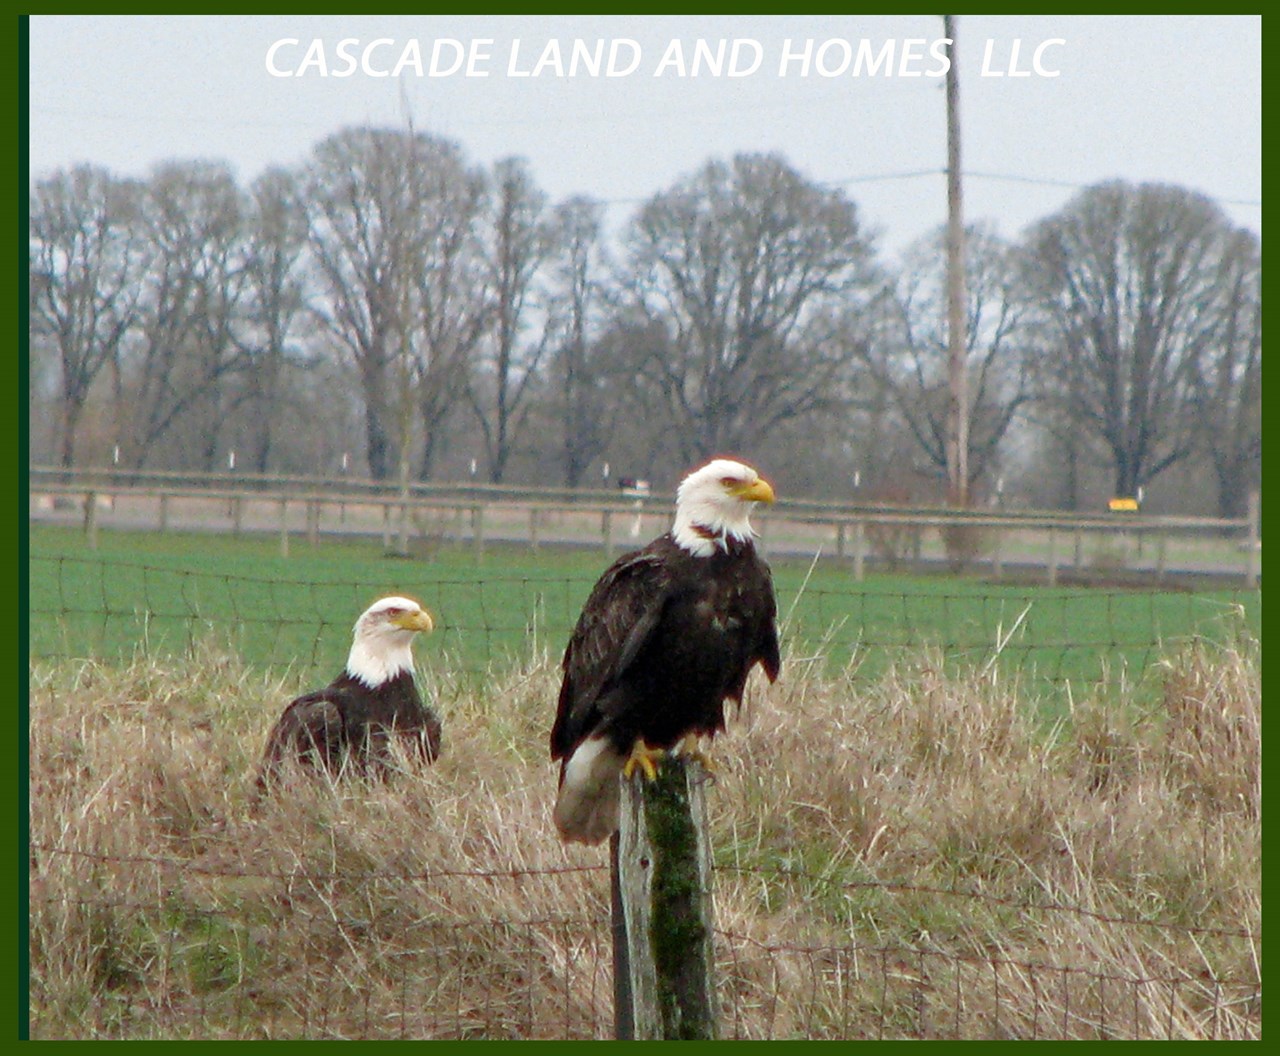 if you enjoy bird watching, the area is on the pacific flyway for migratory birds where you can often see bald eagles, sandhill cranes, and over 400 species of migratory birds! in the winter months, the area has the largest congregation of wintering bald eagles in the lower 48 states!